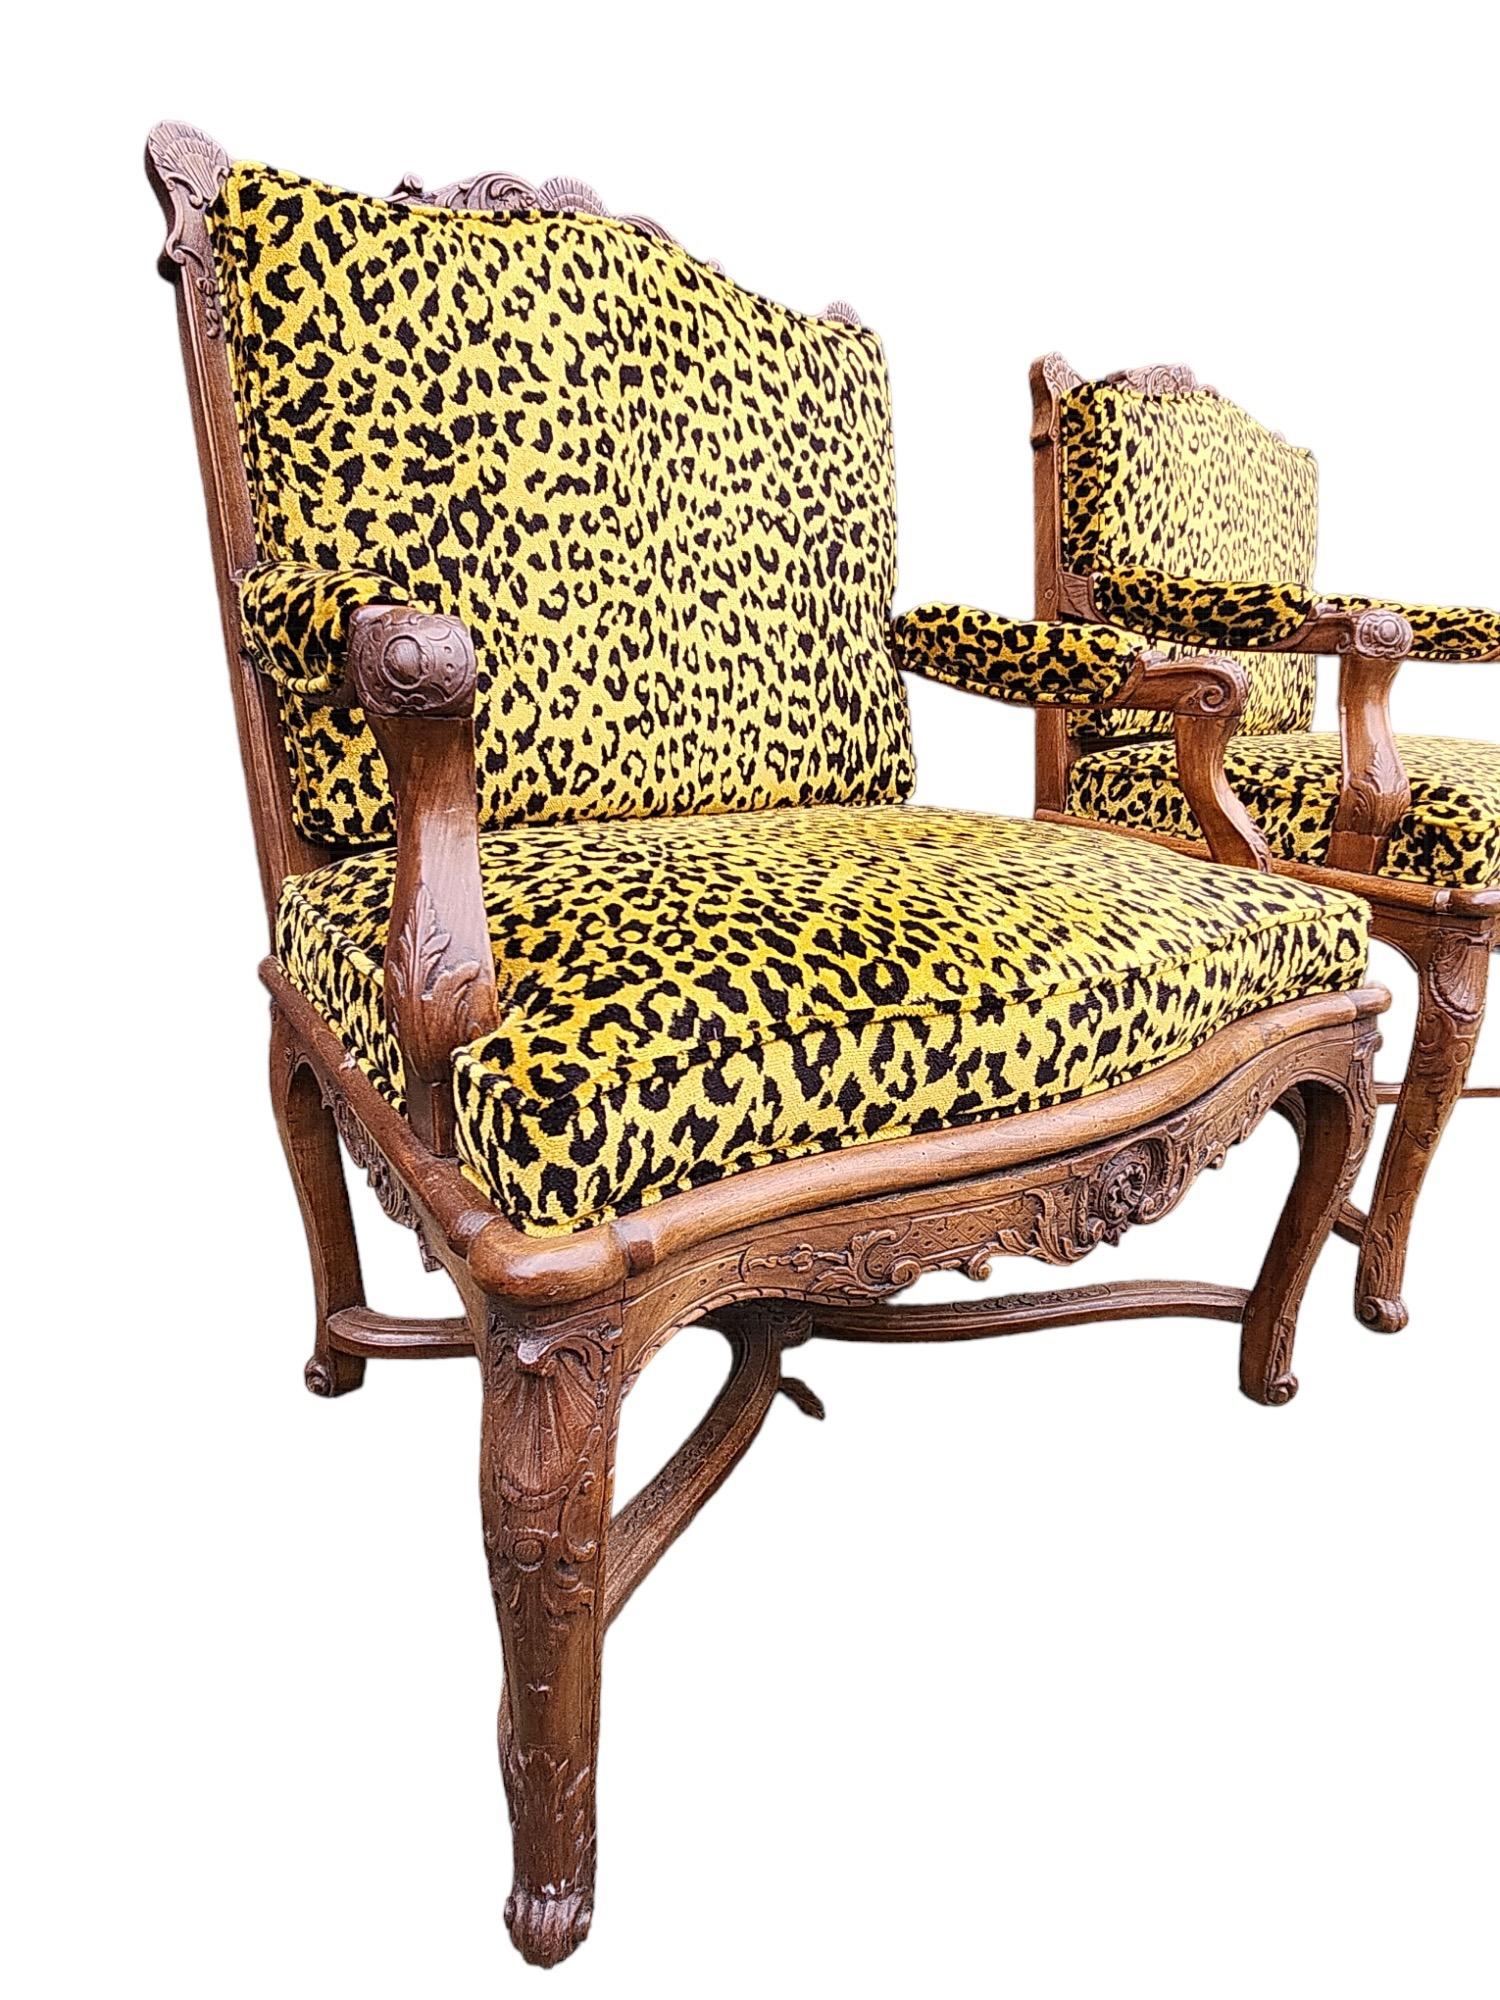 Newly upholstered in Cheetah fabric. The second chair has slightly different dimensions: 27